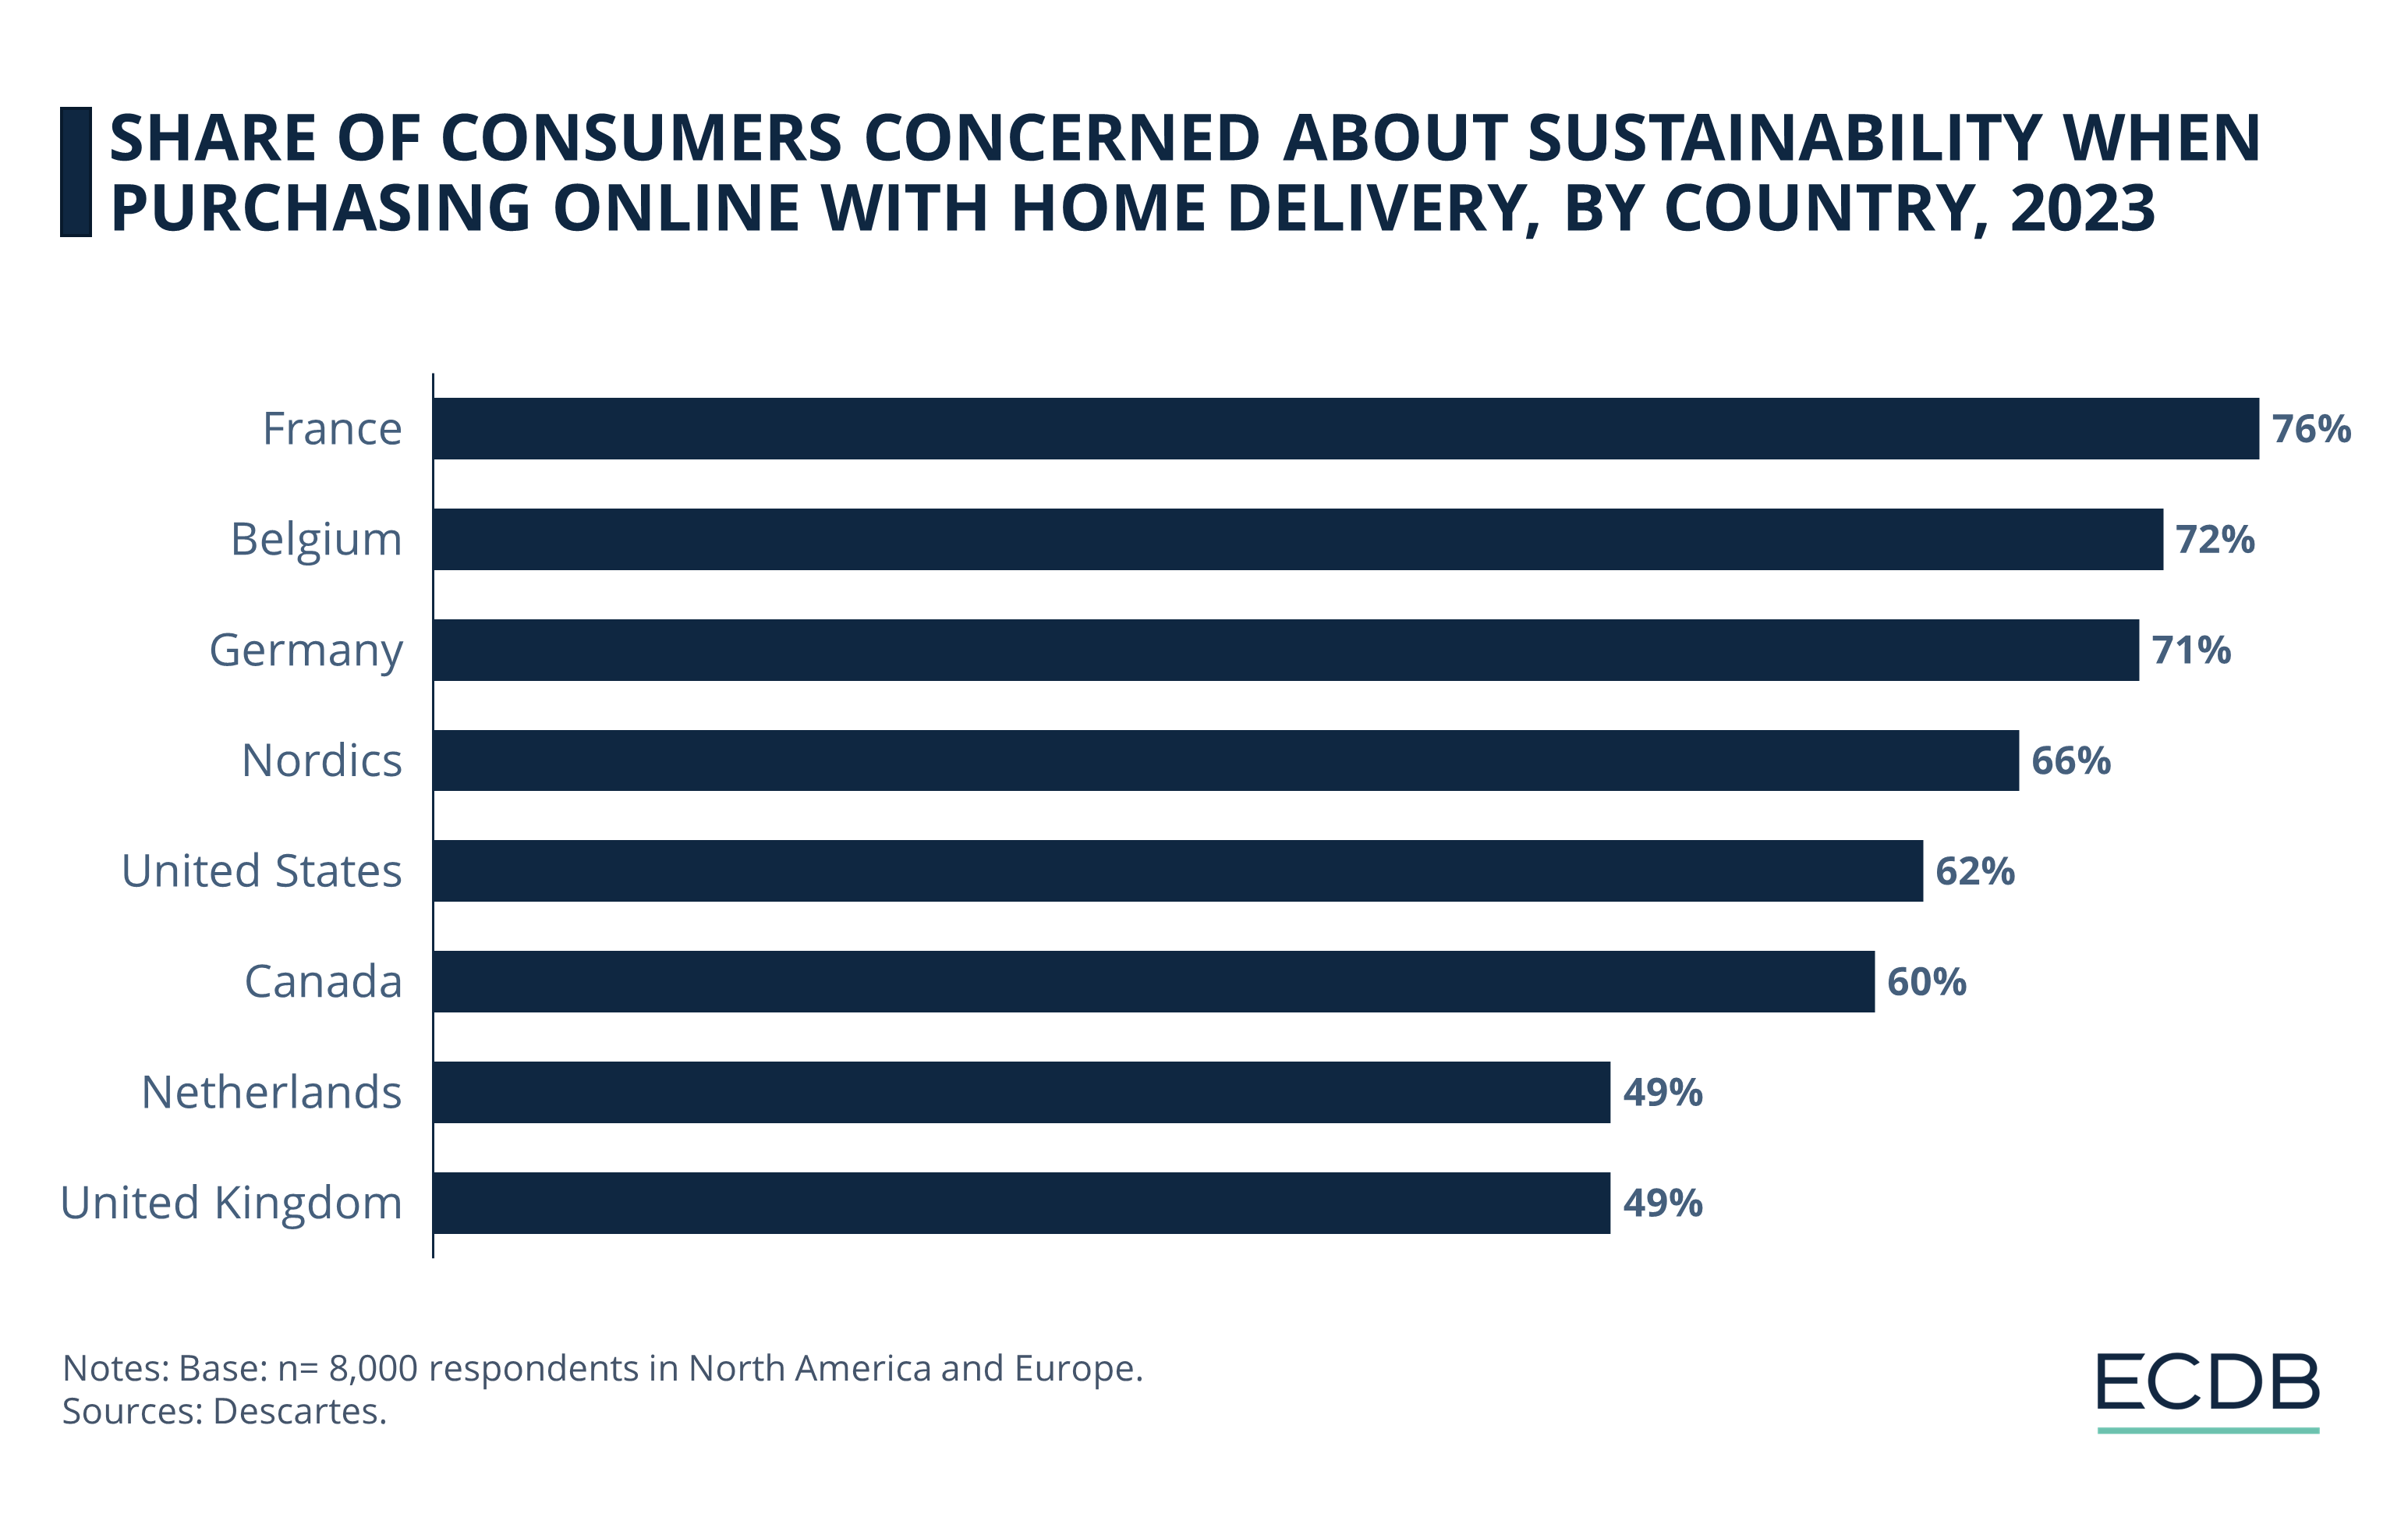 Share of Consumers Concerned About Sustainability When Purchasing Online With Home Delivery, by Country, 2023